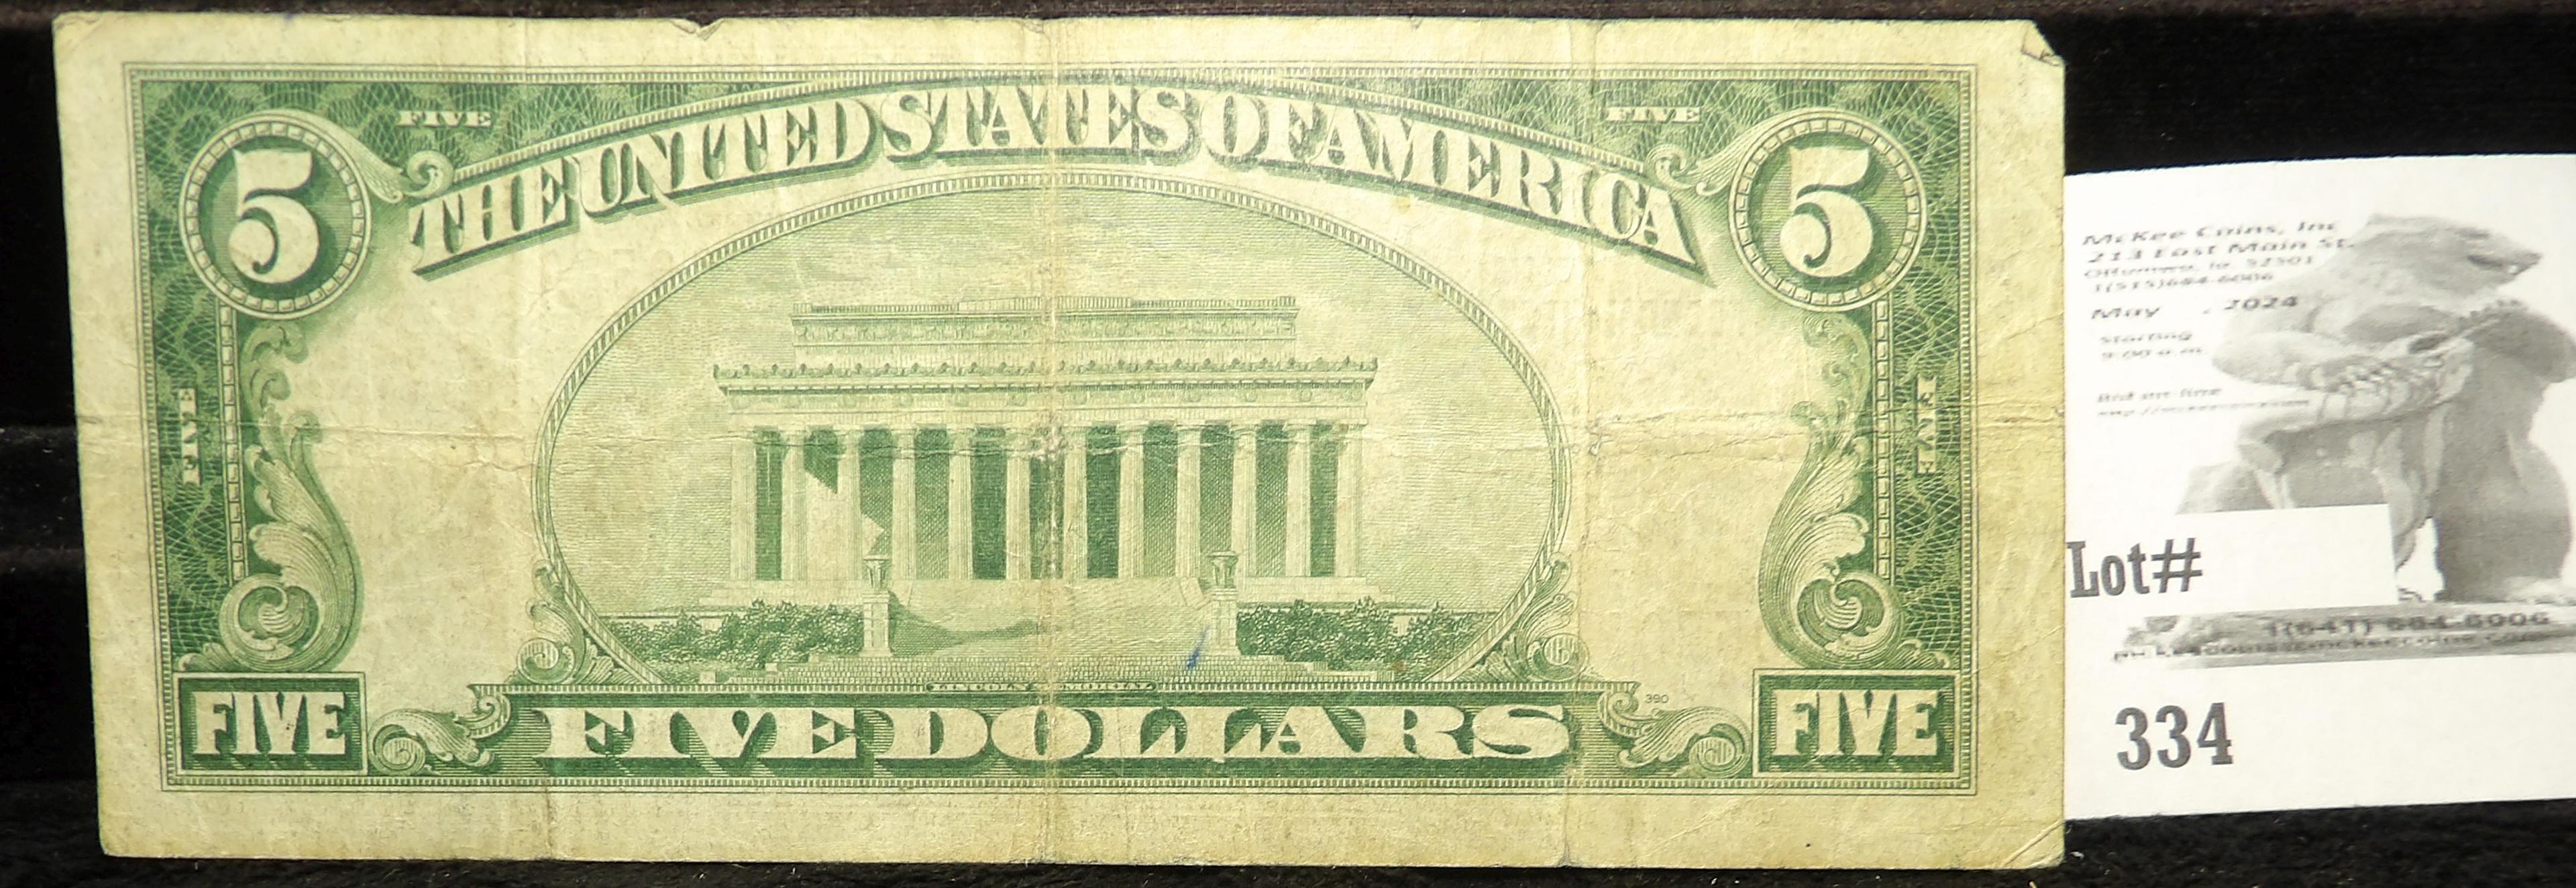 Series 1929 $5 National Currency The Federal Reserve Bank of Chicago, Illinois, Serial No. G05804794